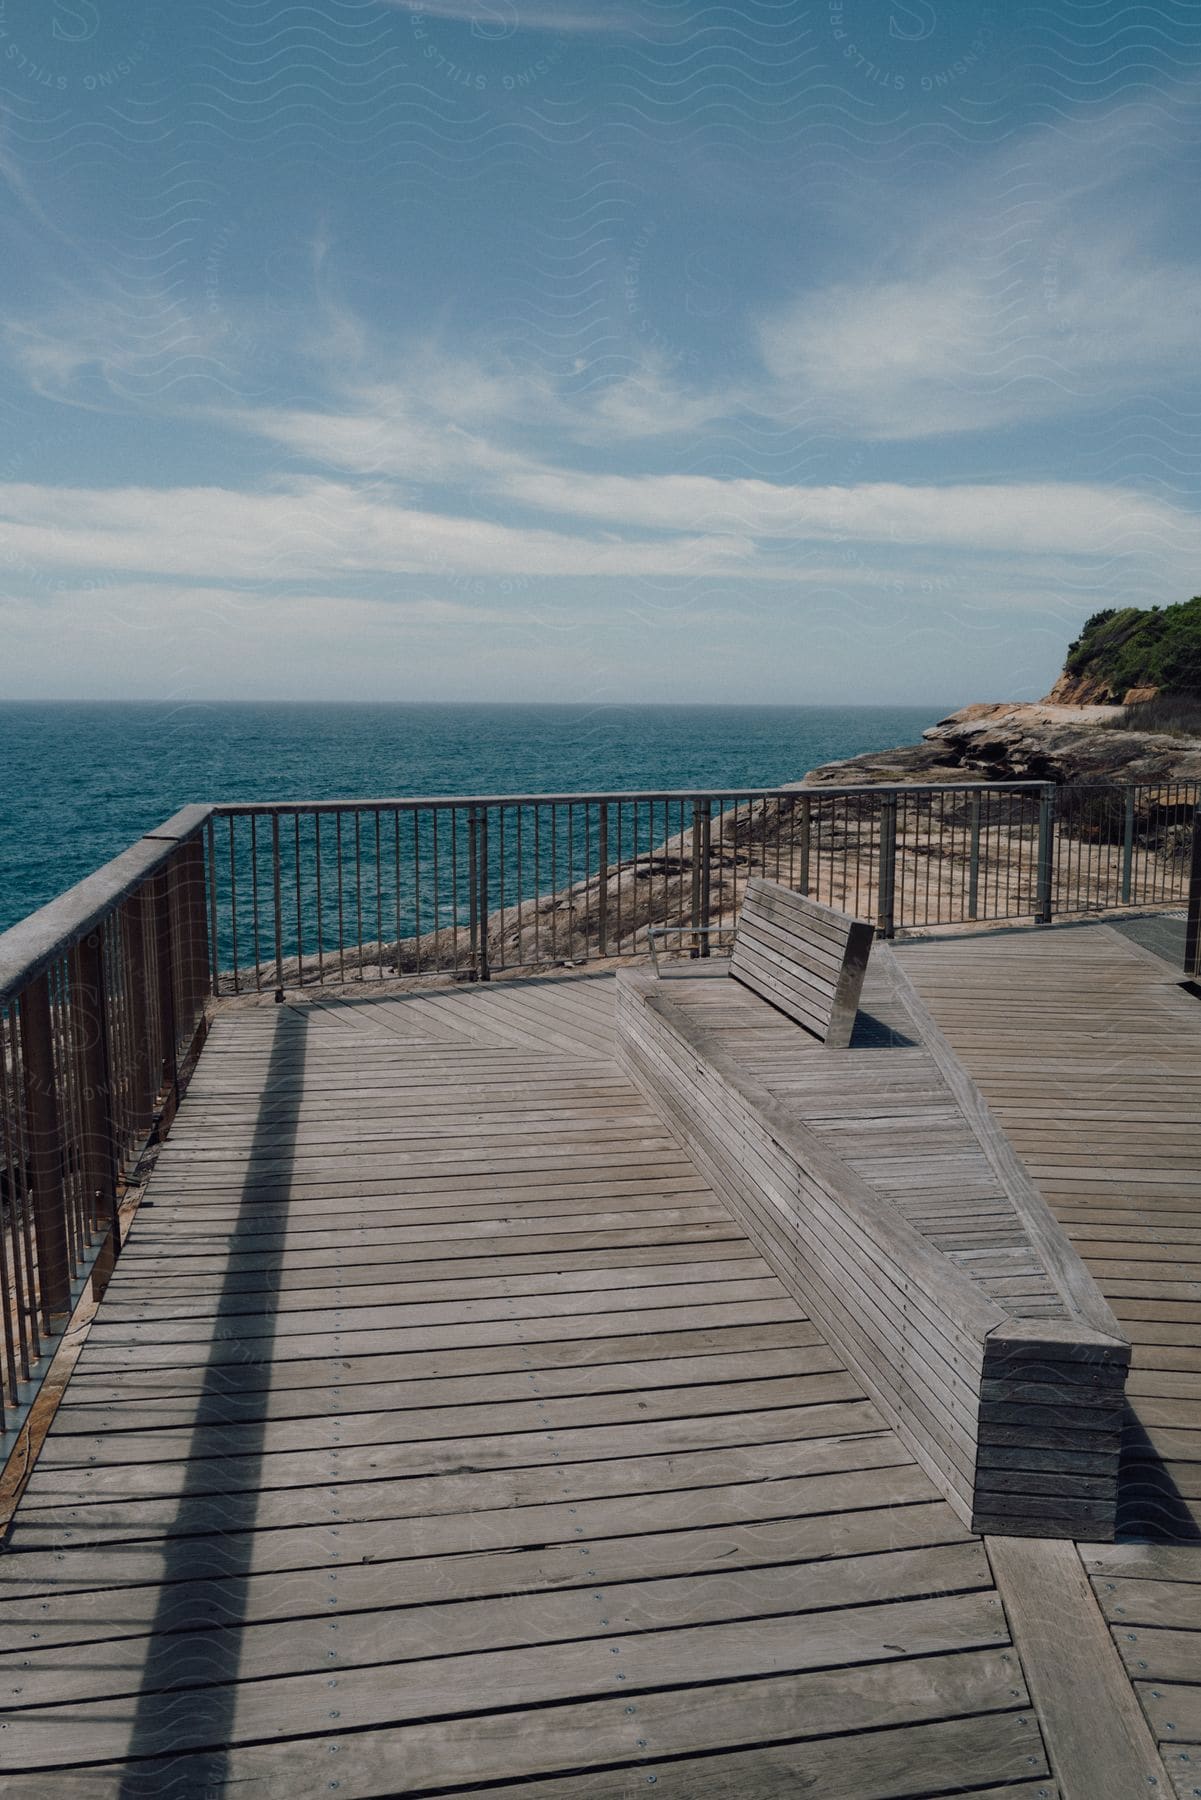 Wooden deck on the edge of a rocky coast overlooking an expanse of blue sea on a clear day.